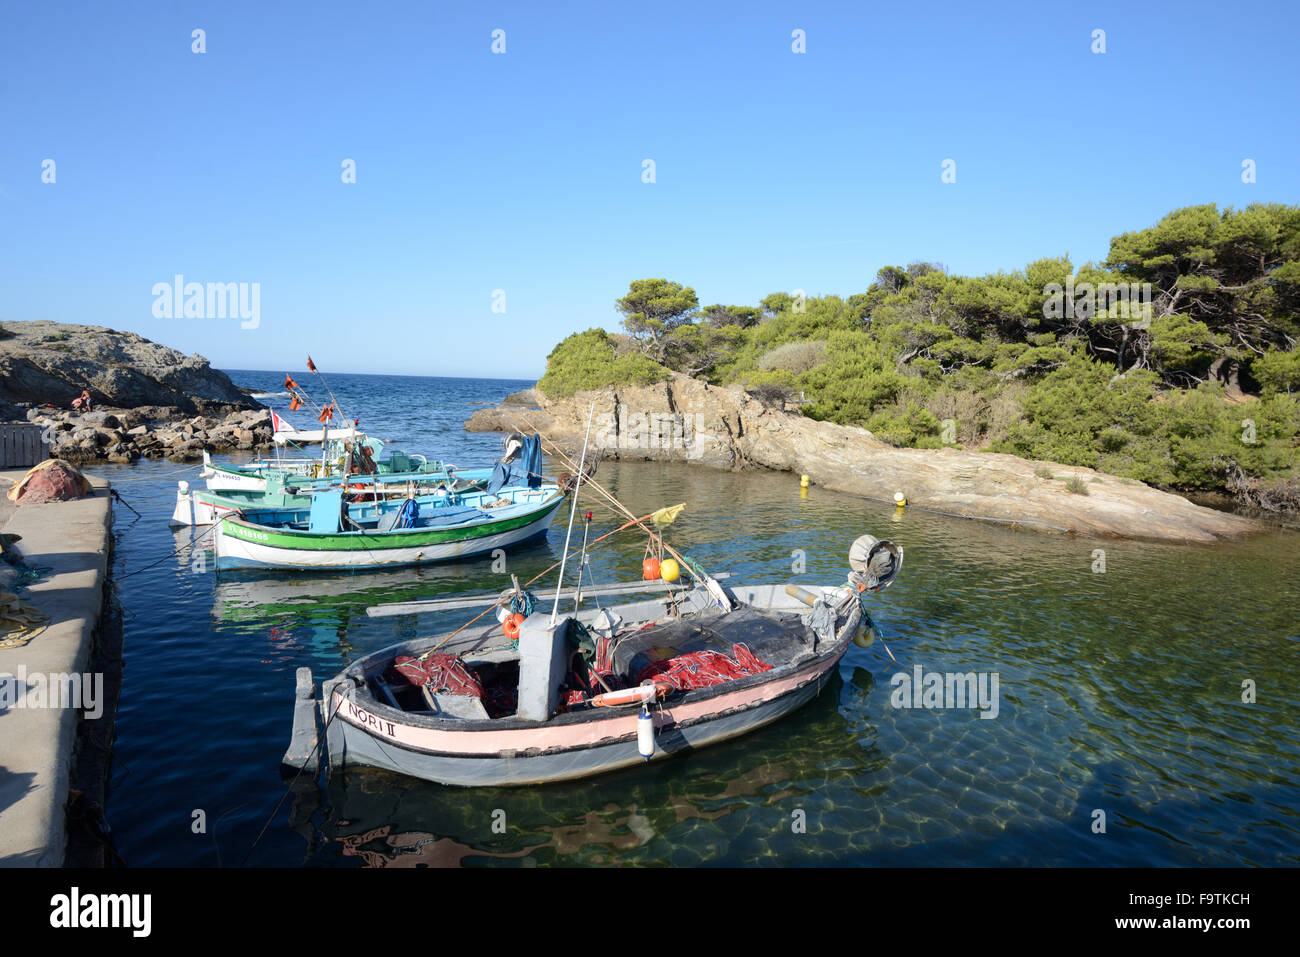 Traditional Wooden Fishing Boats Île du Grand Gaou Six-Fours-les-Plages  near Sanary-sur-Mer Provence France Stock Photo - Alamy